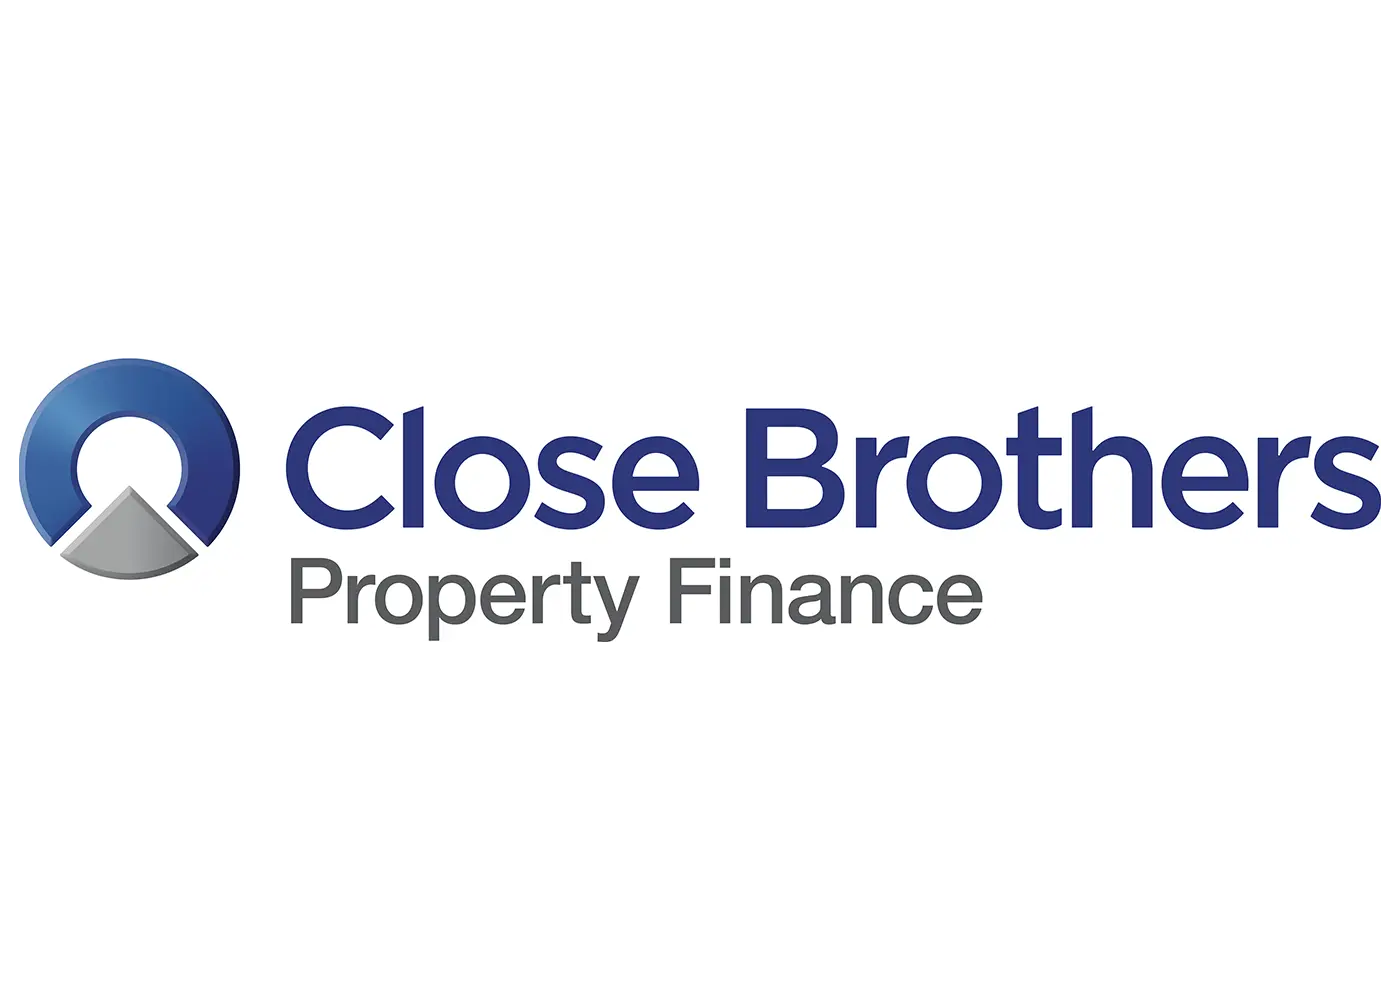 Our Lenders - Close Brothers Property Finance